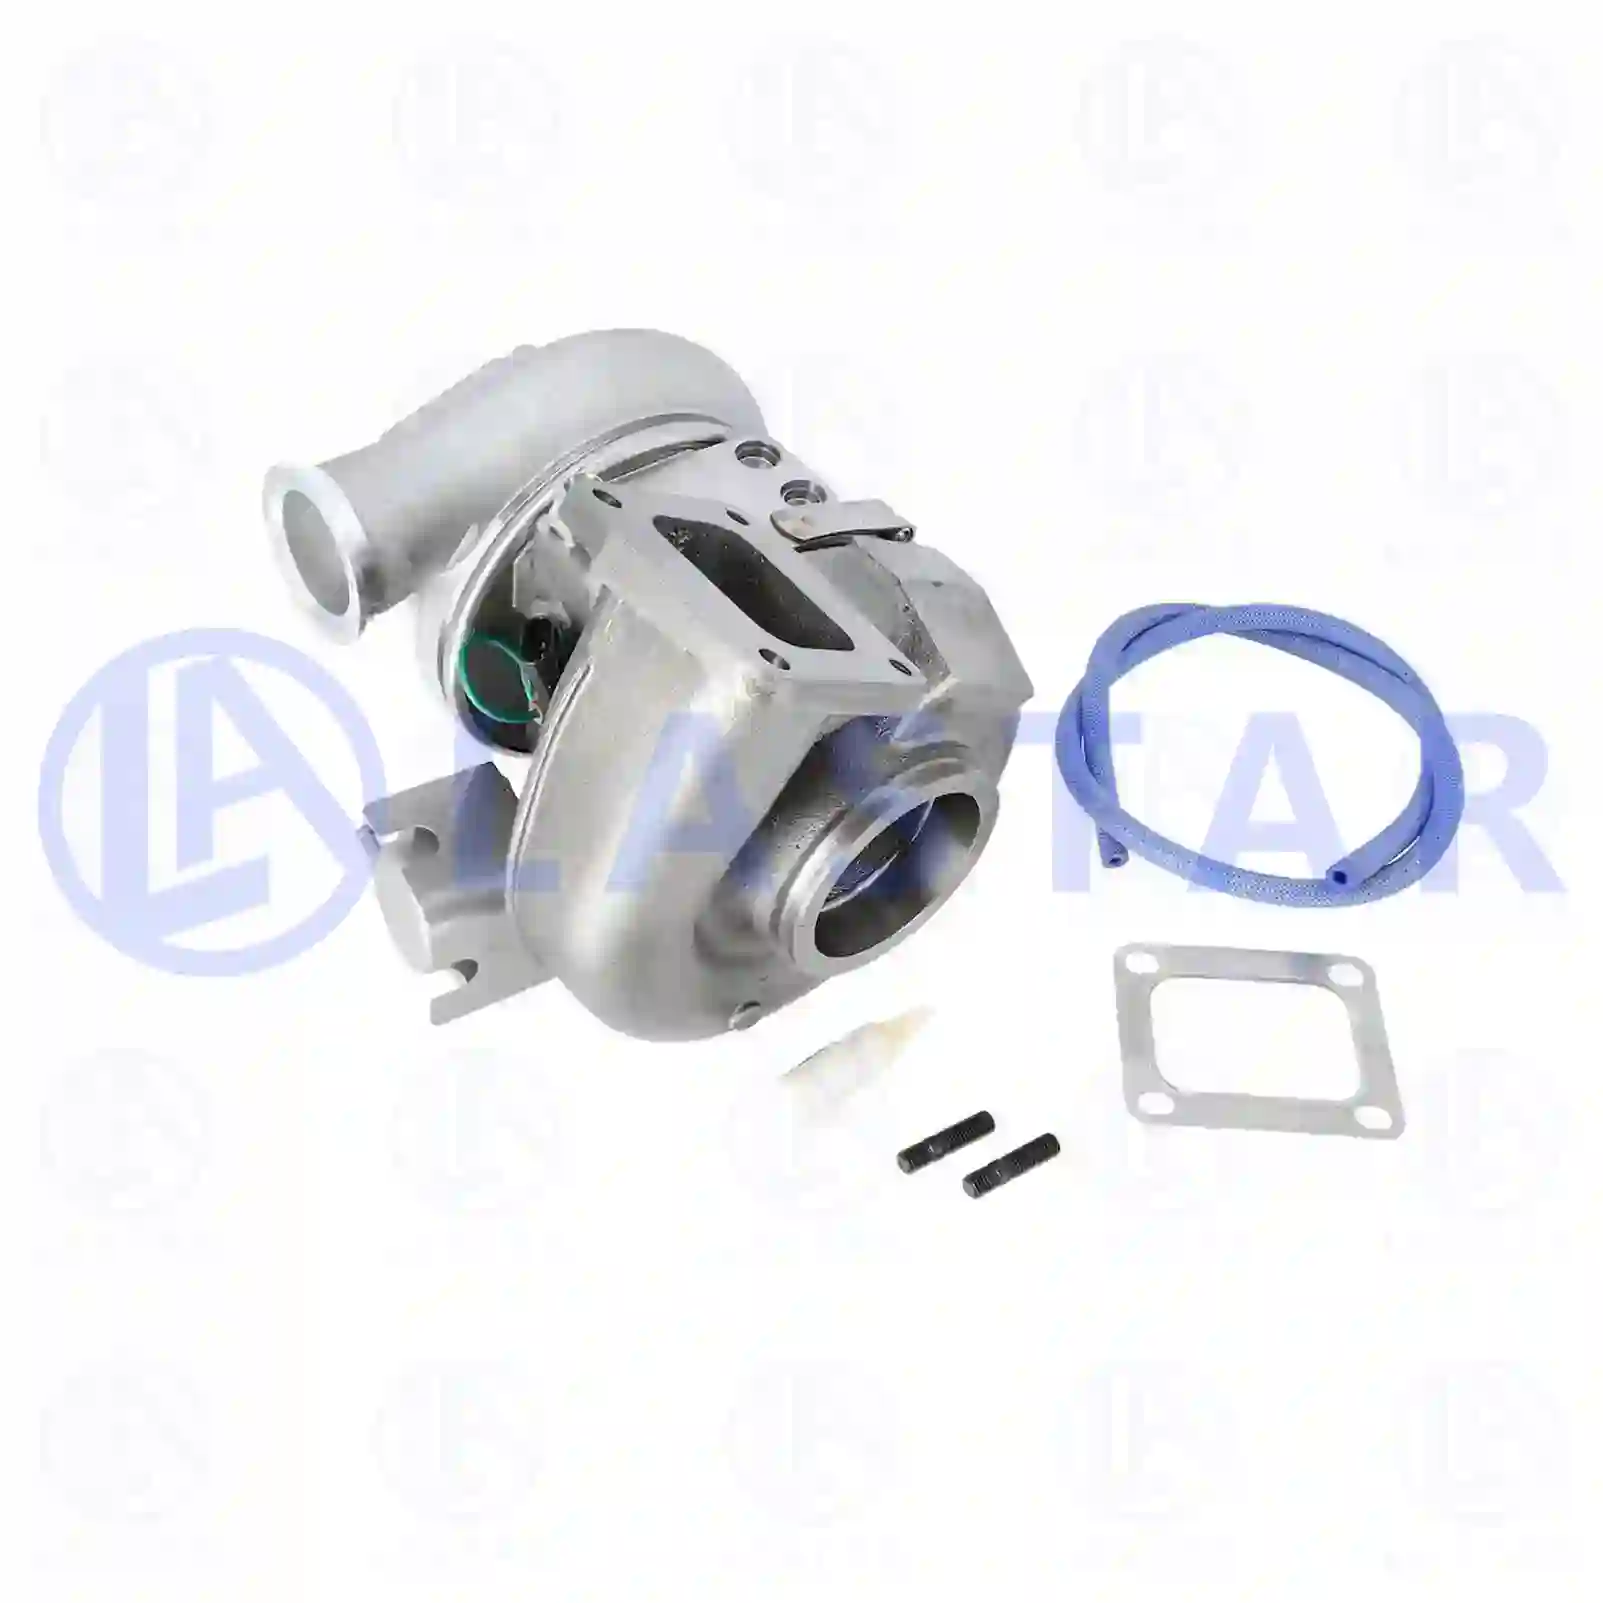 Turbocharger, with gasket kit, 77700355, 02998522, 2998522, 500341336, 500350446, 504014308, 504017225, 504032322, 504252146, 504252148, 504252234, 504252235 ||  77700355 Lastar Spare Part | Truck Spare Parts, Auotomotive Spare Parts Turbocharger, with gasket kit, 77700355, 02998522, 2998522, 500341336, 500350446, 504014308, 504017225, 504032322, 504252146, 504252148, 504252234, 504252235 ||  77700355 Lastar Spare Part | Truck Spare Parts, Auotomotive Spare Parts